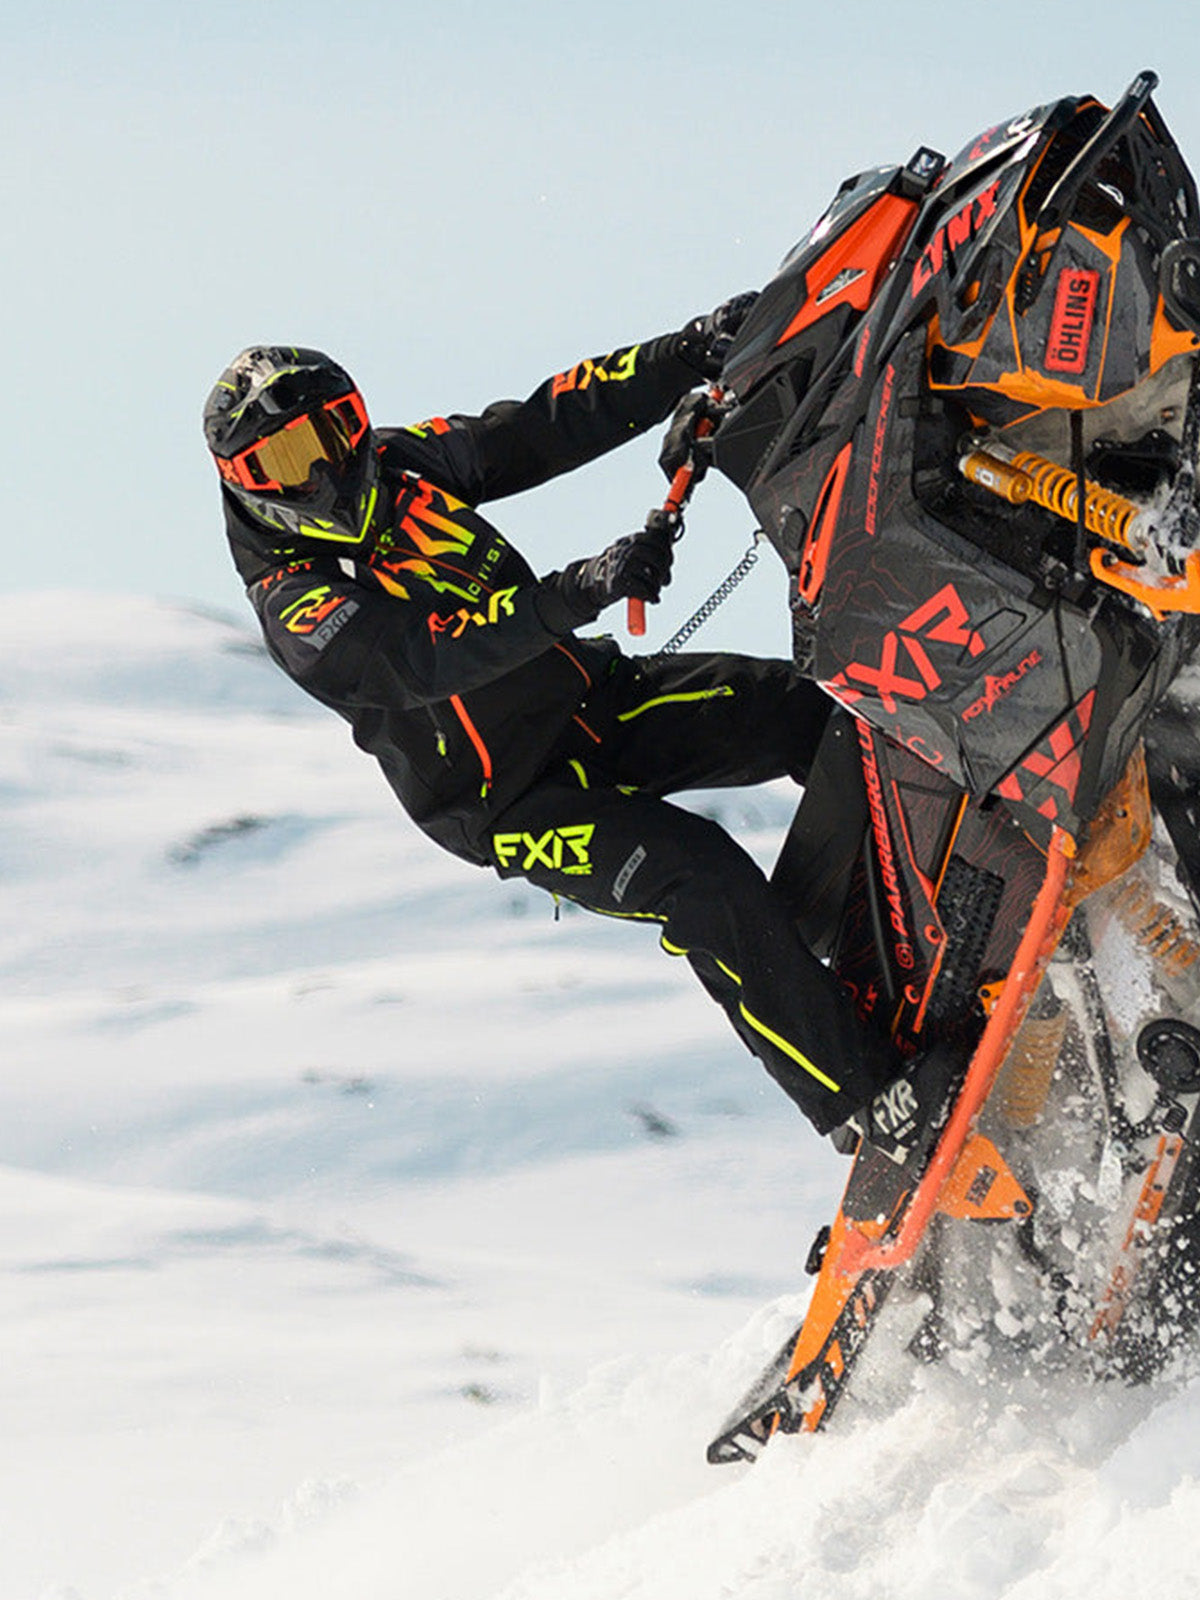 Action image of a guy snowmobiling on the mountain wearing an FXR gear from FXR's Mountain Crossover collection